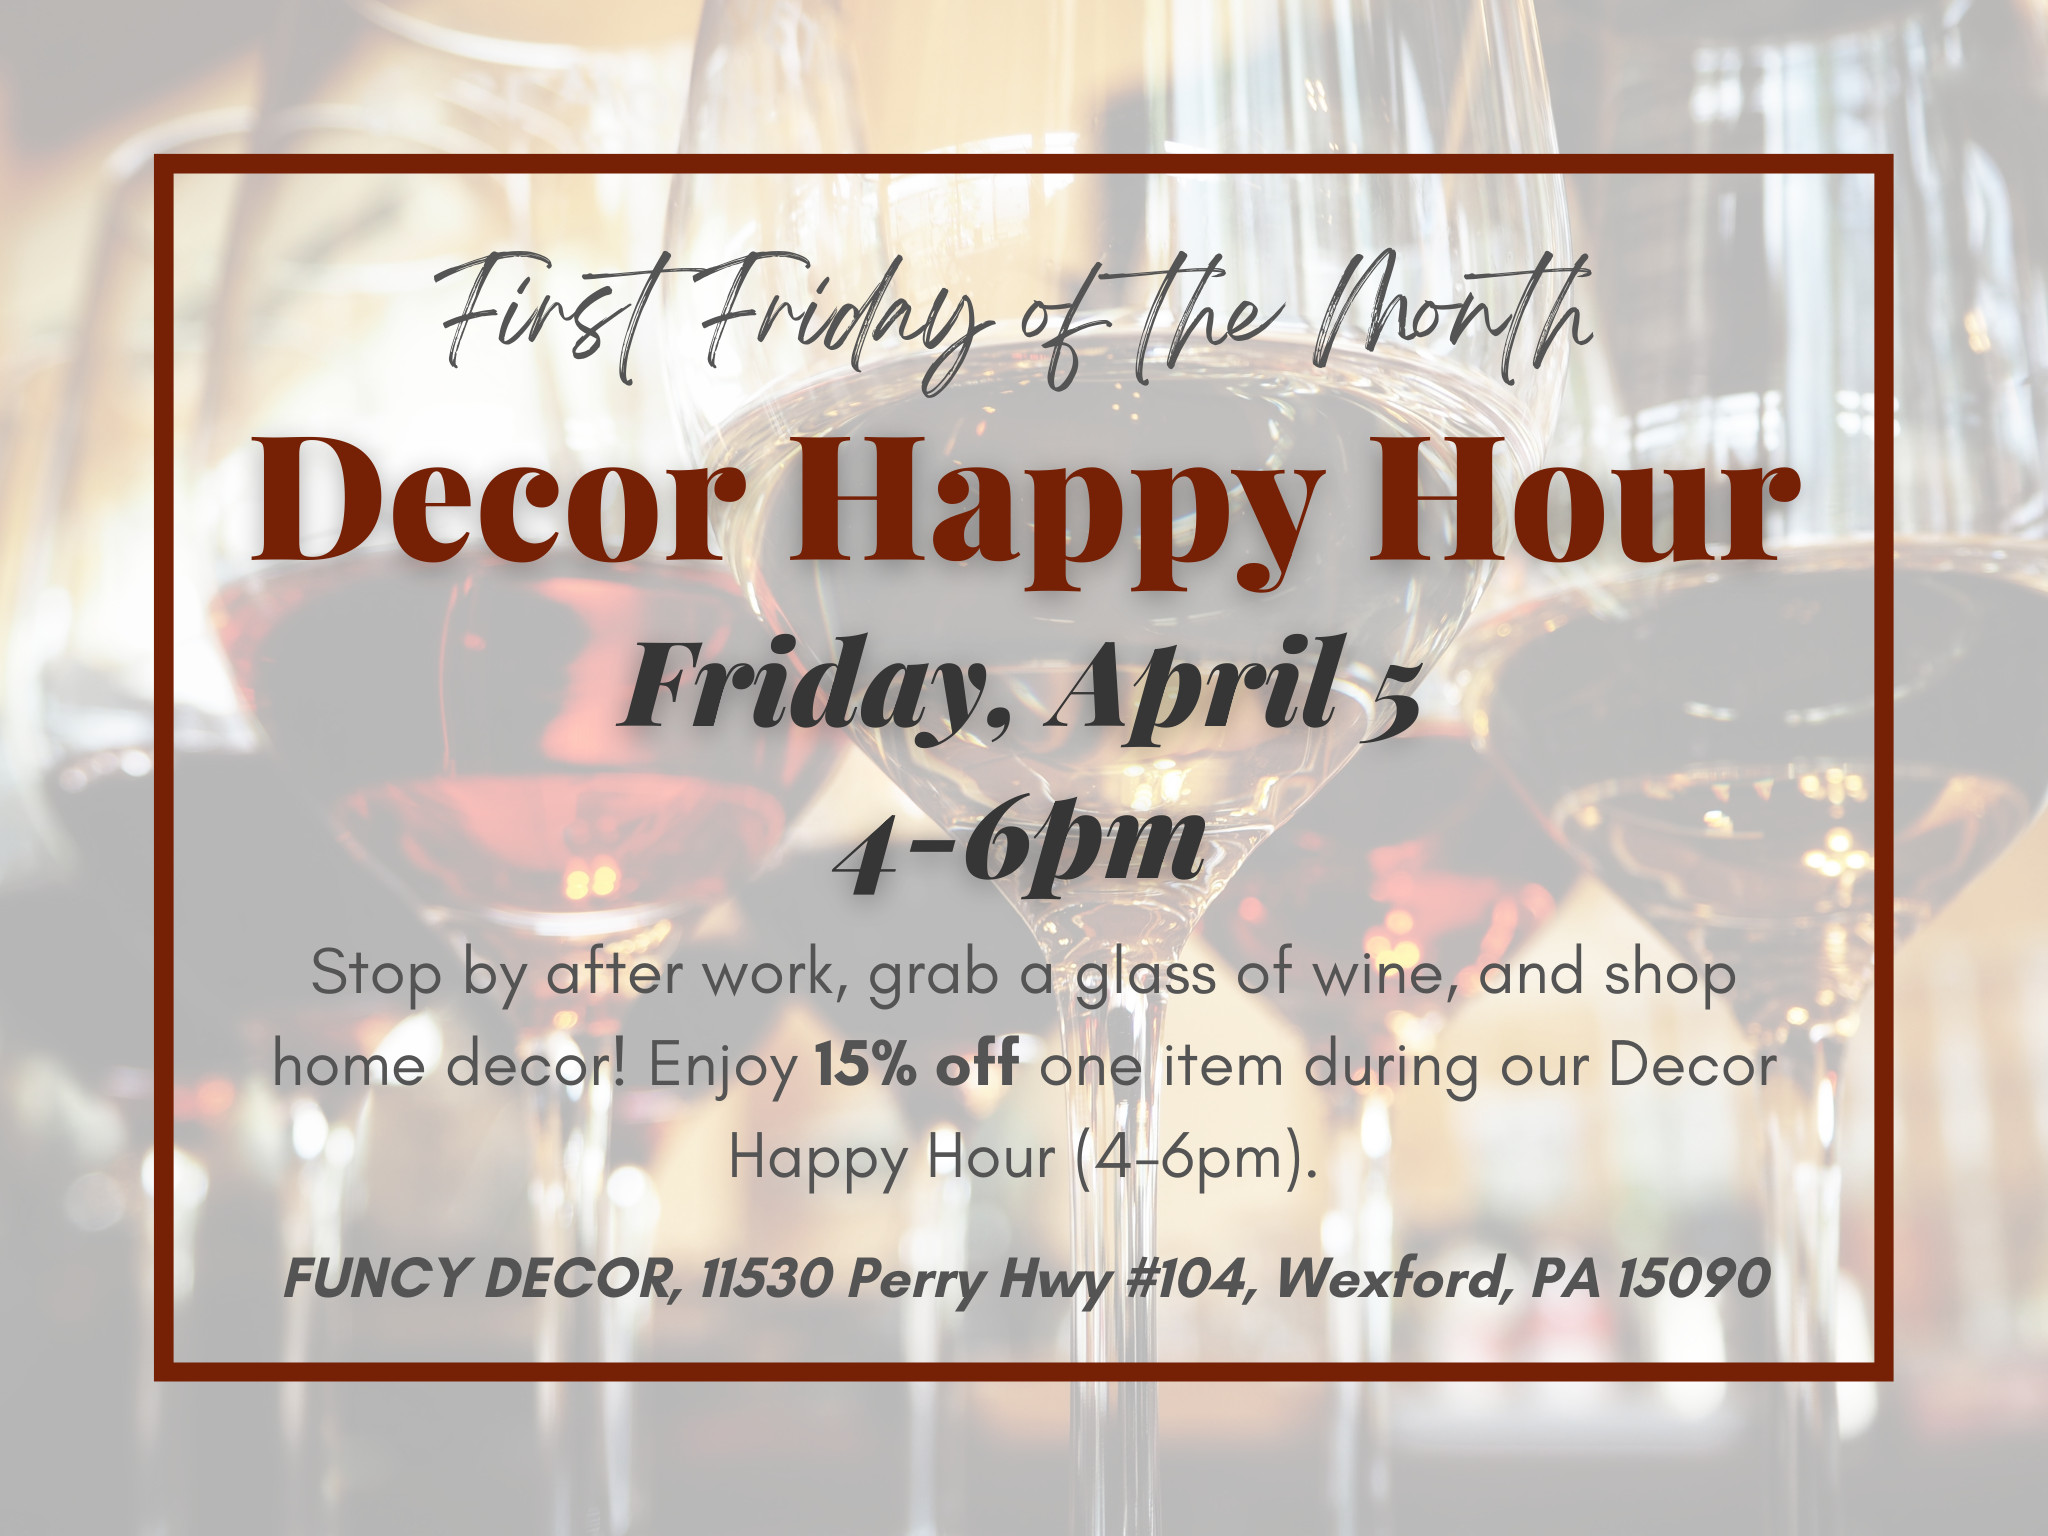 First Friday of the Month Decor Happy Hour